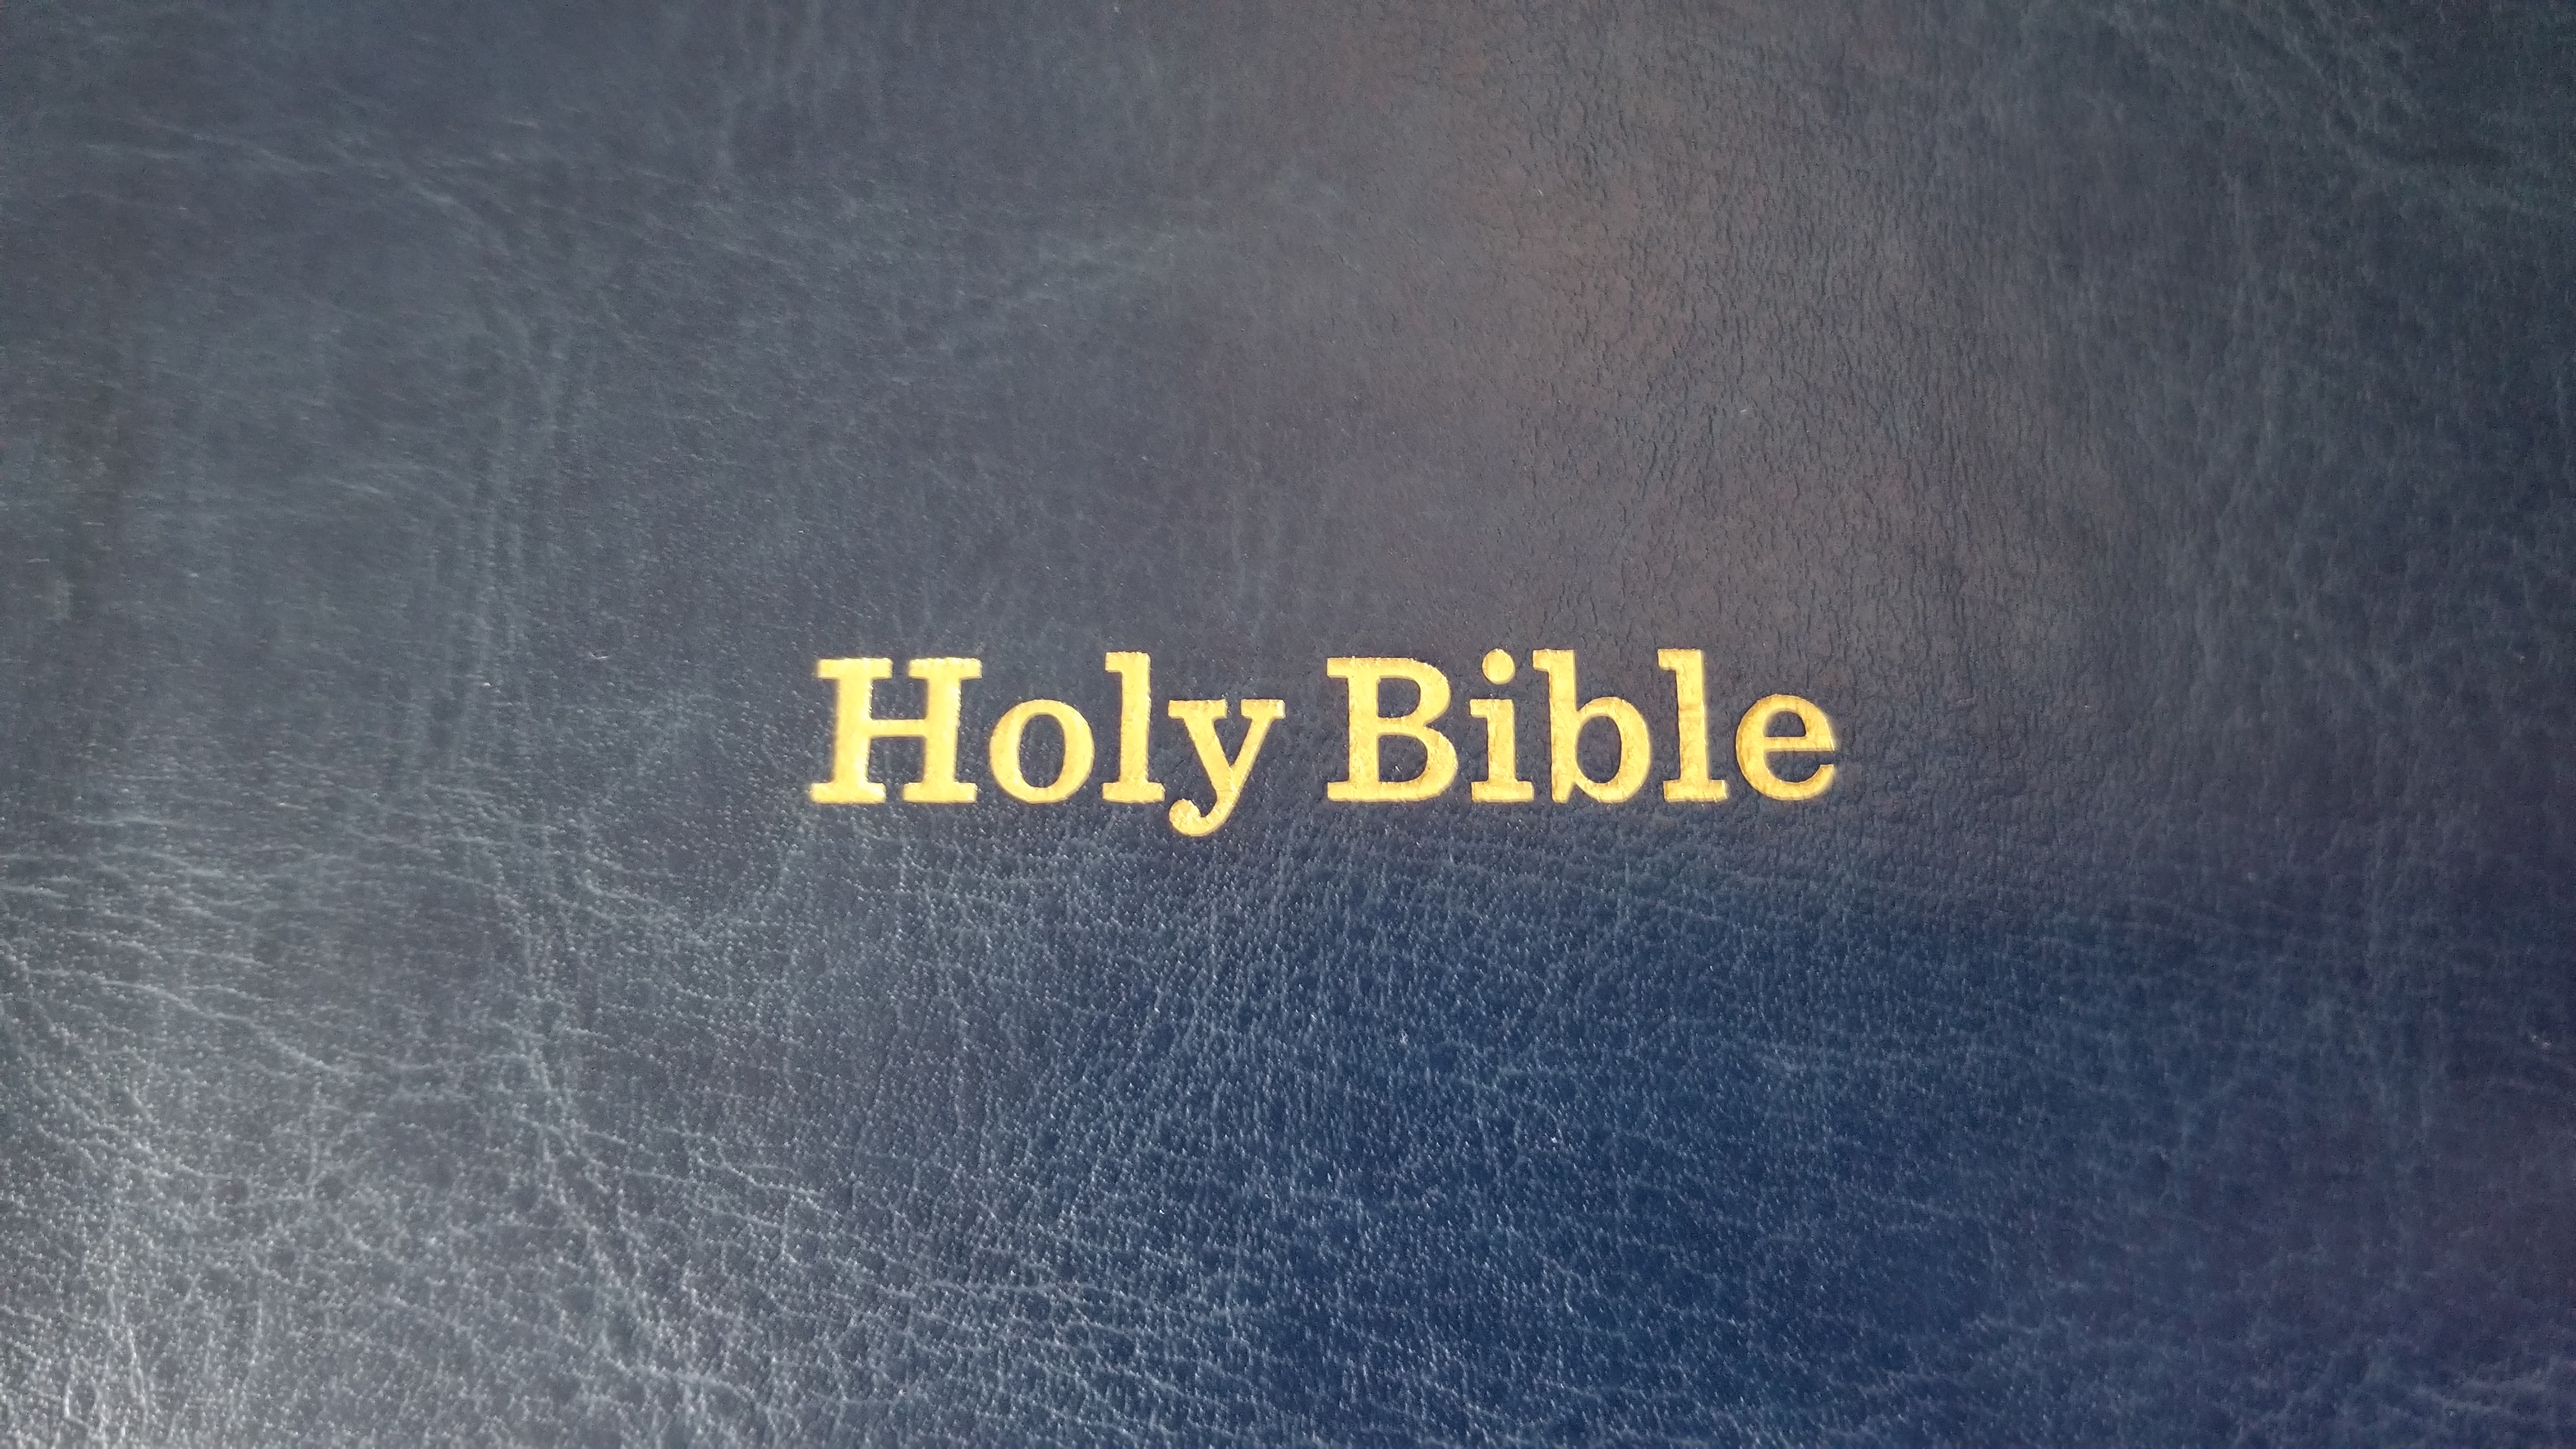 Holy Bible  The Great Adventure Catholic Bible – Ascension